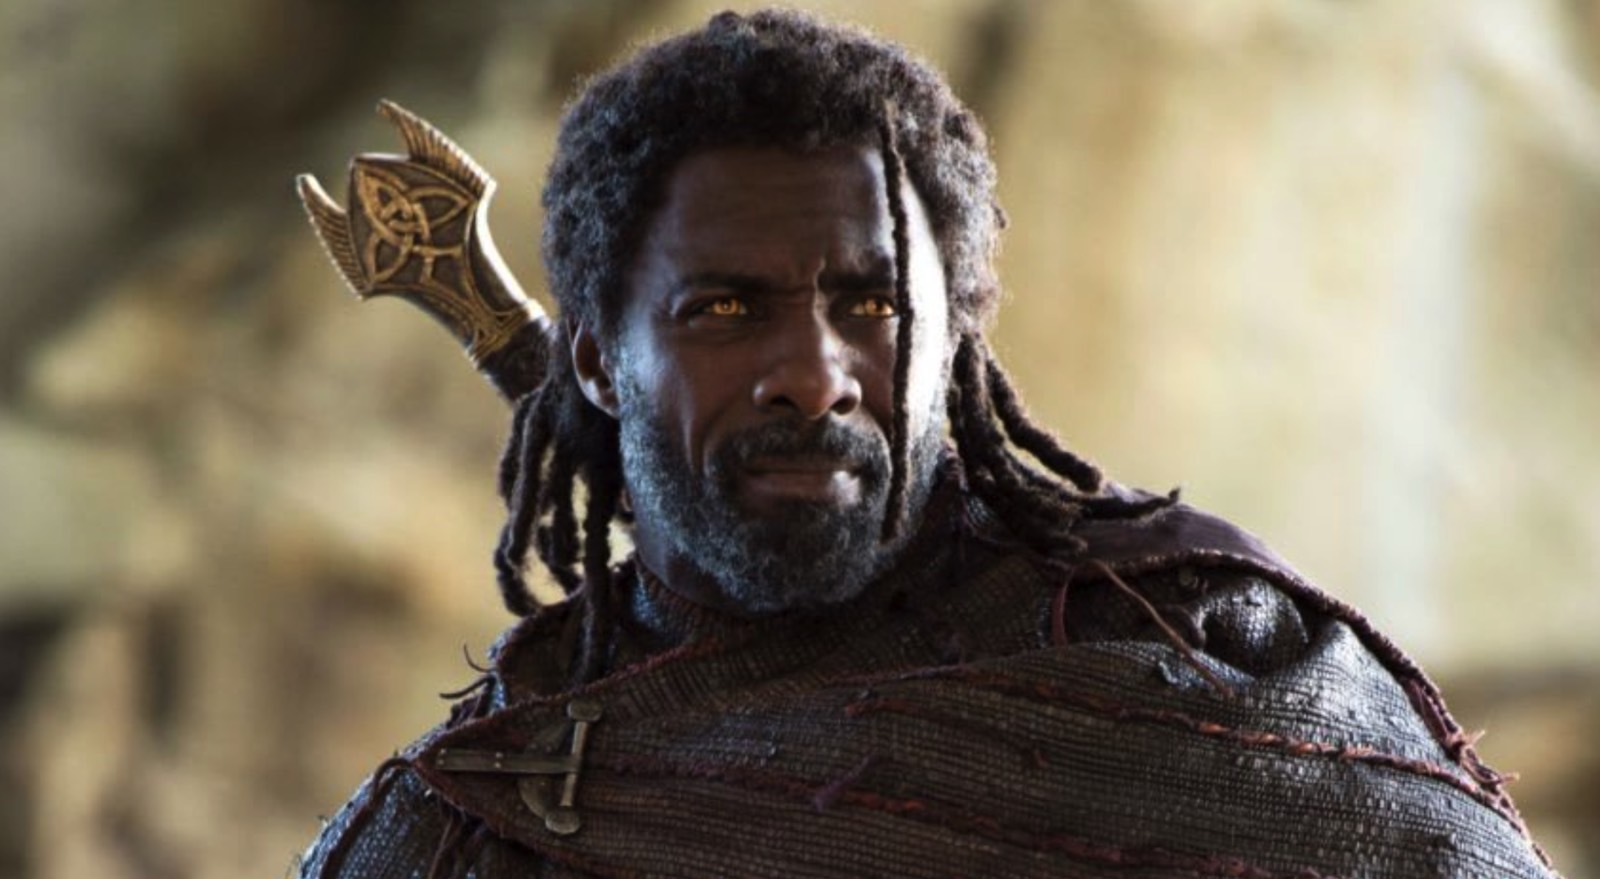 Heimdall’s MCU death might not be permanent – here’s why that’s so exciting